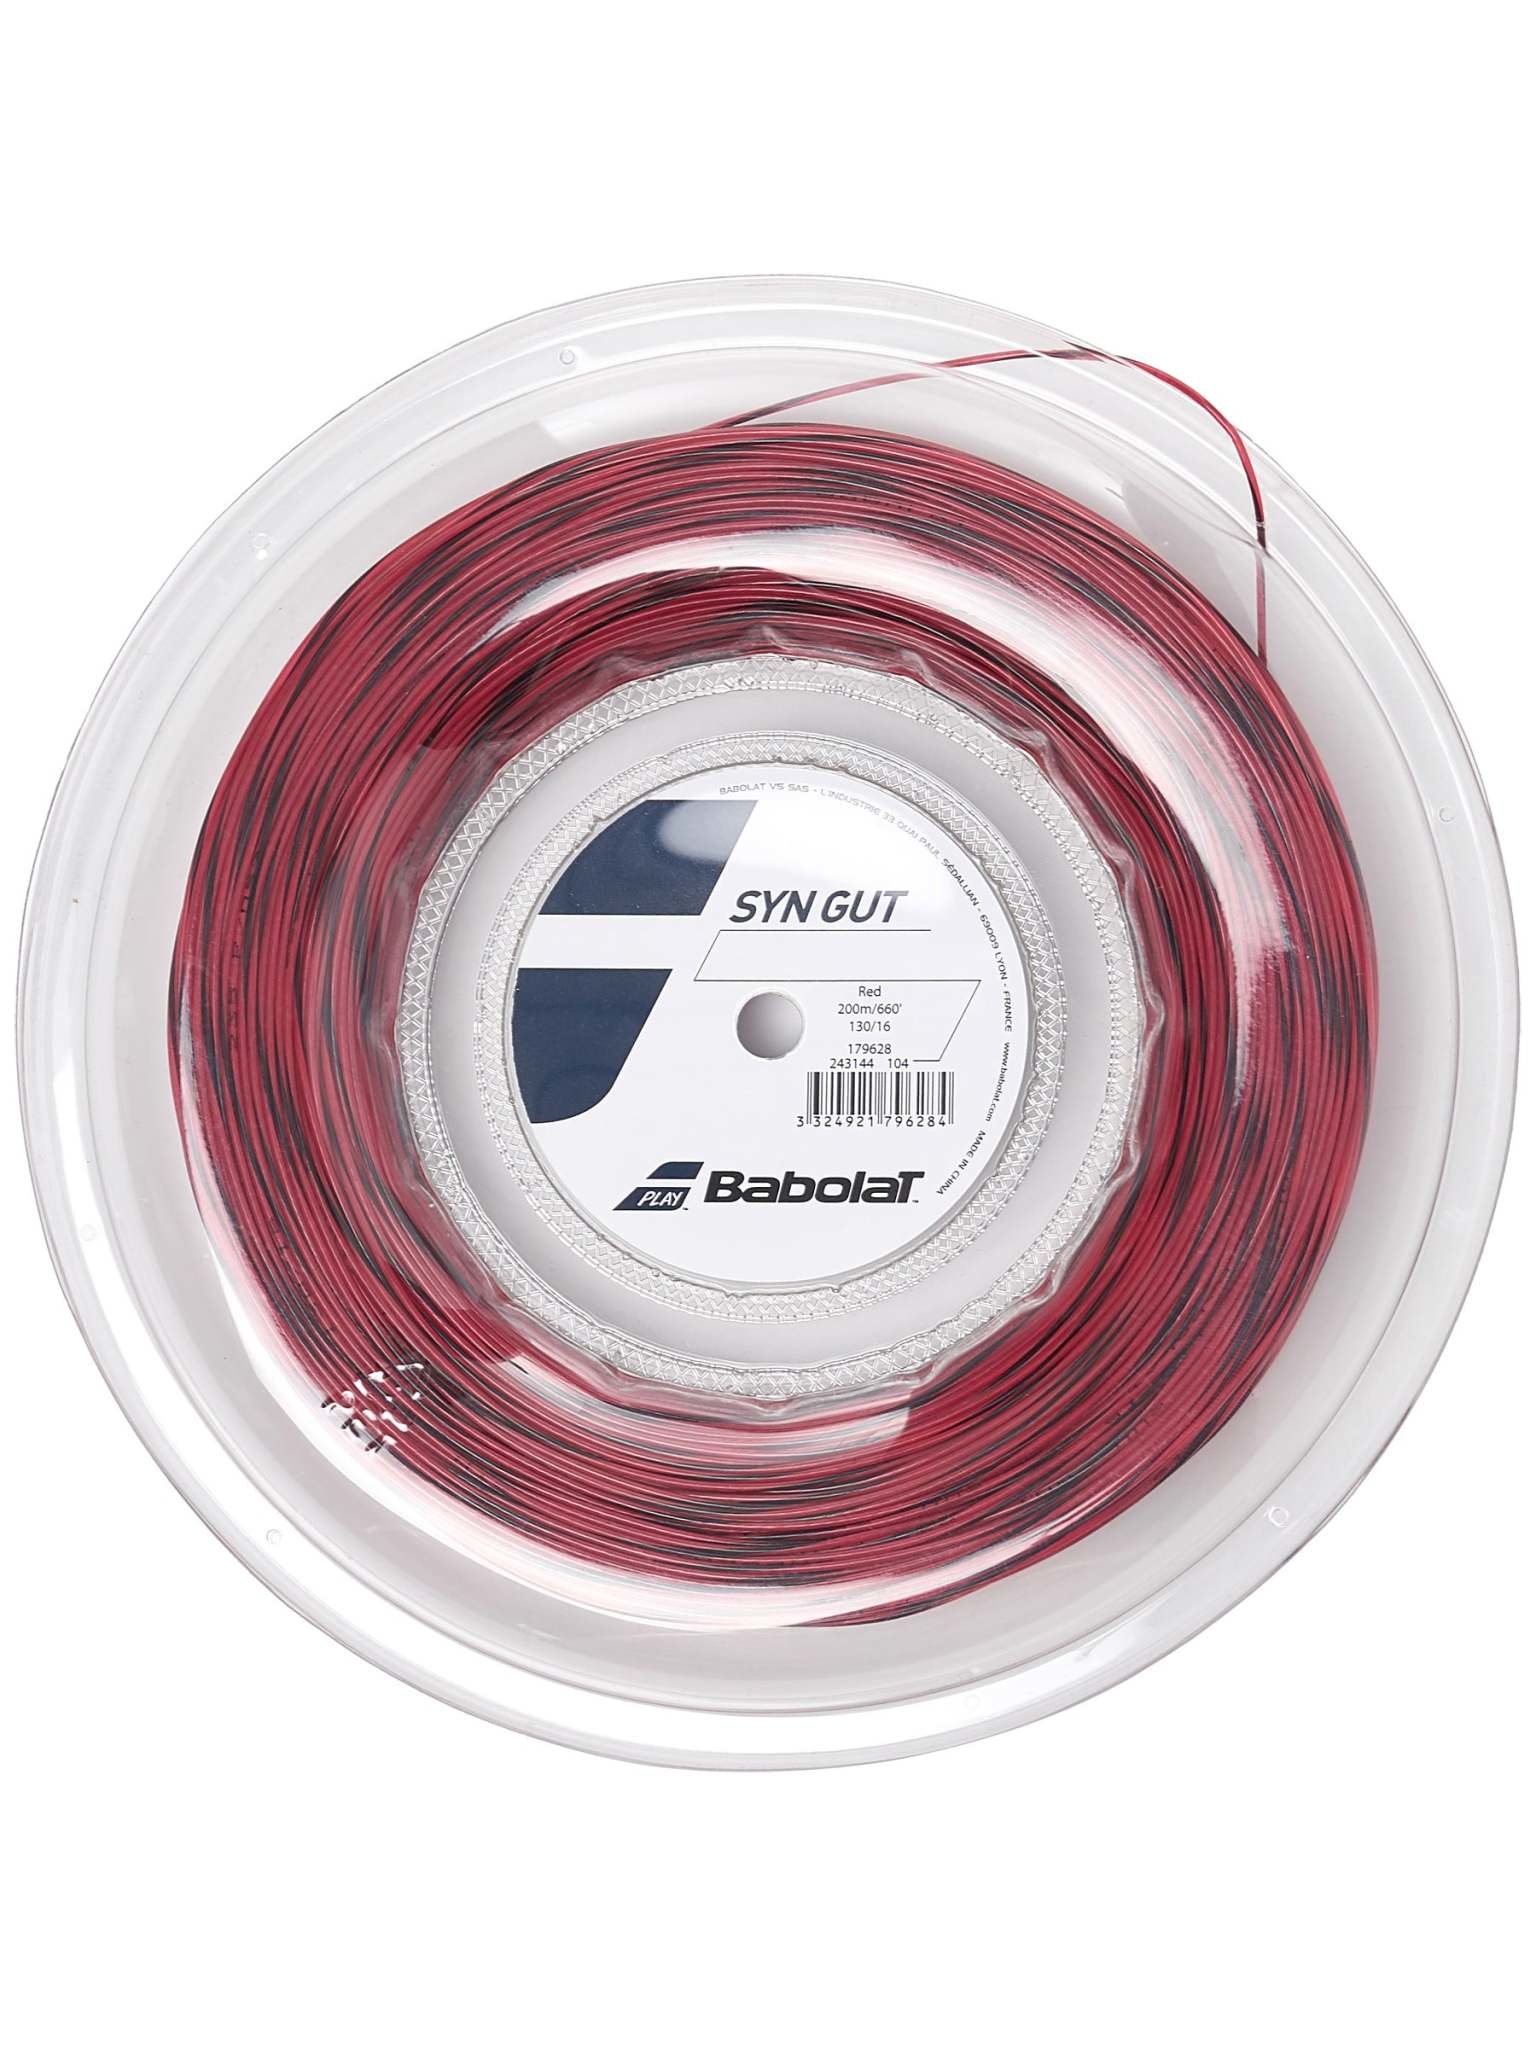 Babolat Synthetic Gut Tennis Strings 660' Reels - Cayman Sports